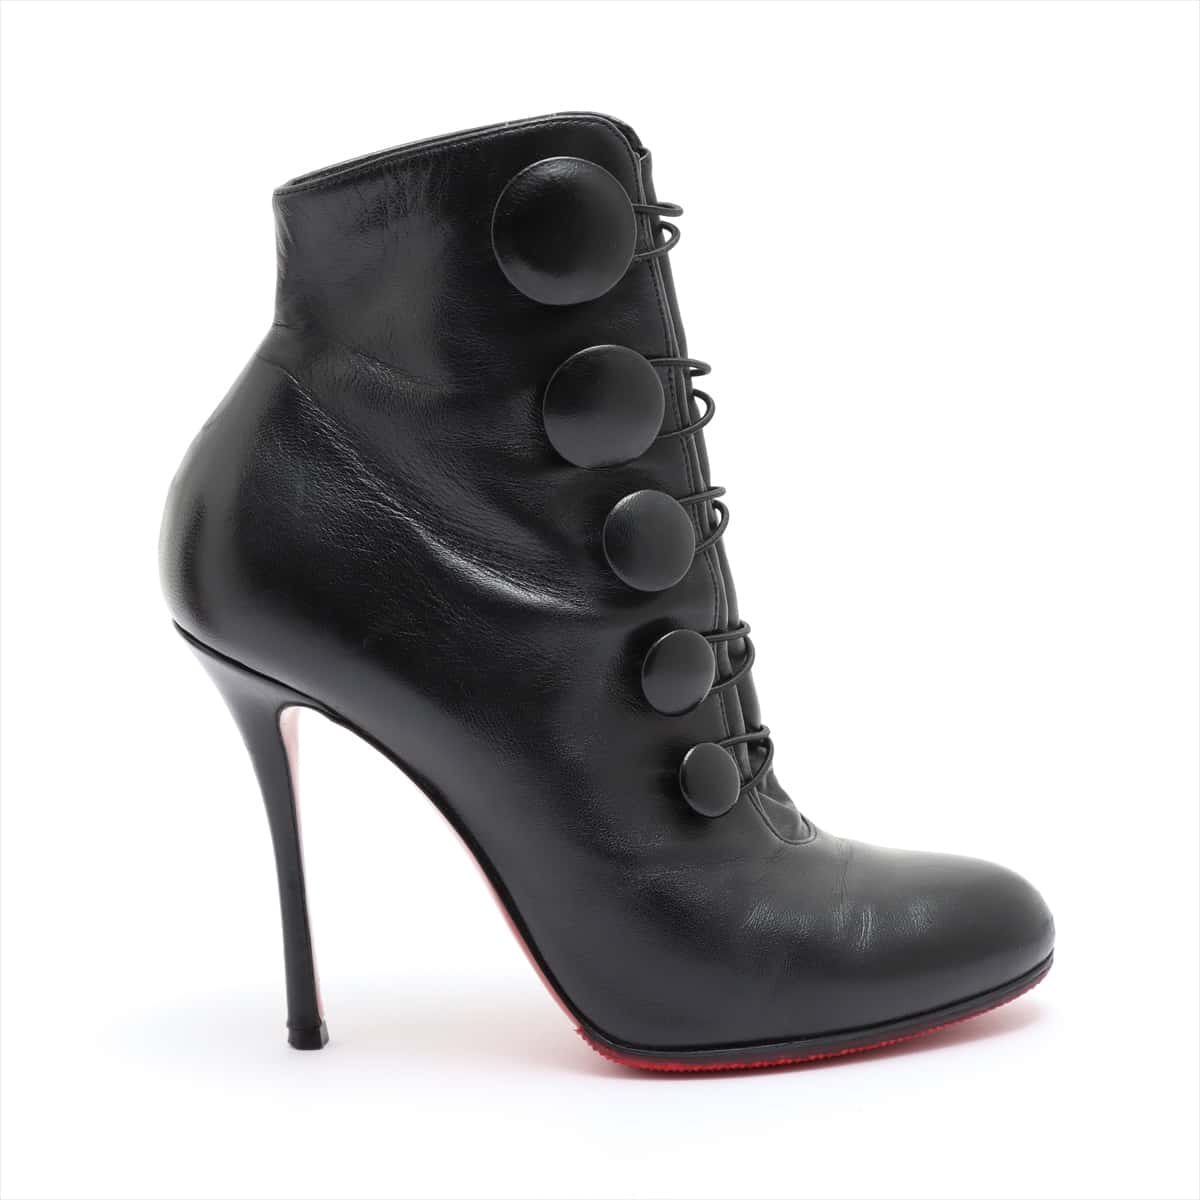 Christian Louboutin Leather Boots 37.5 Ladies' Black Has half rubber